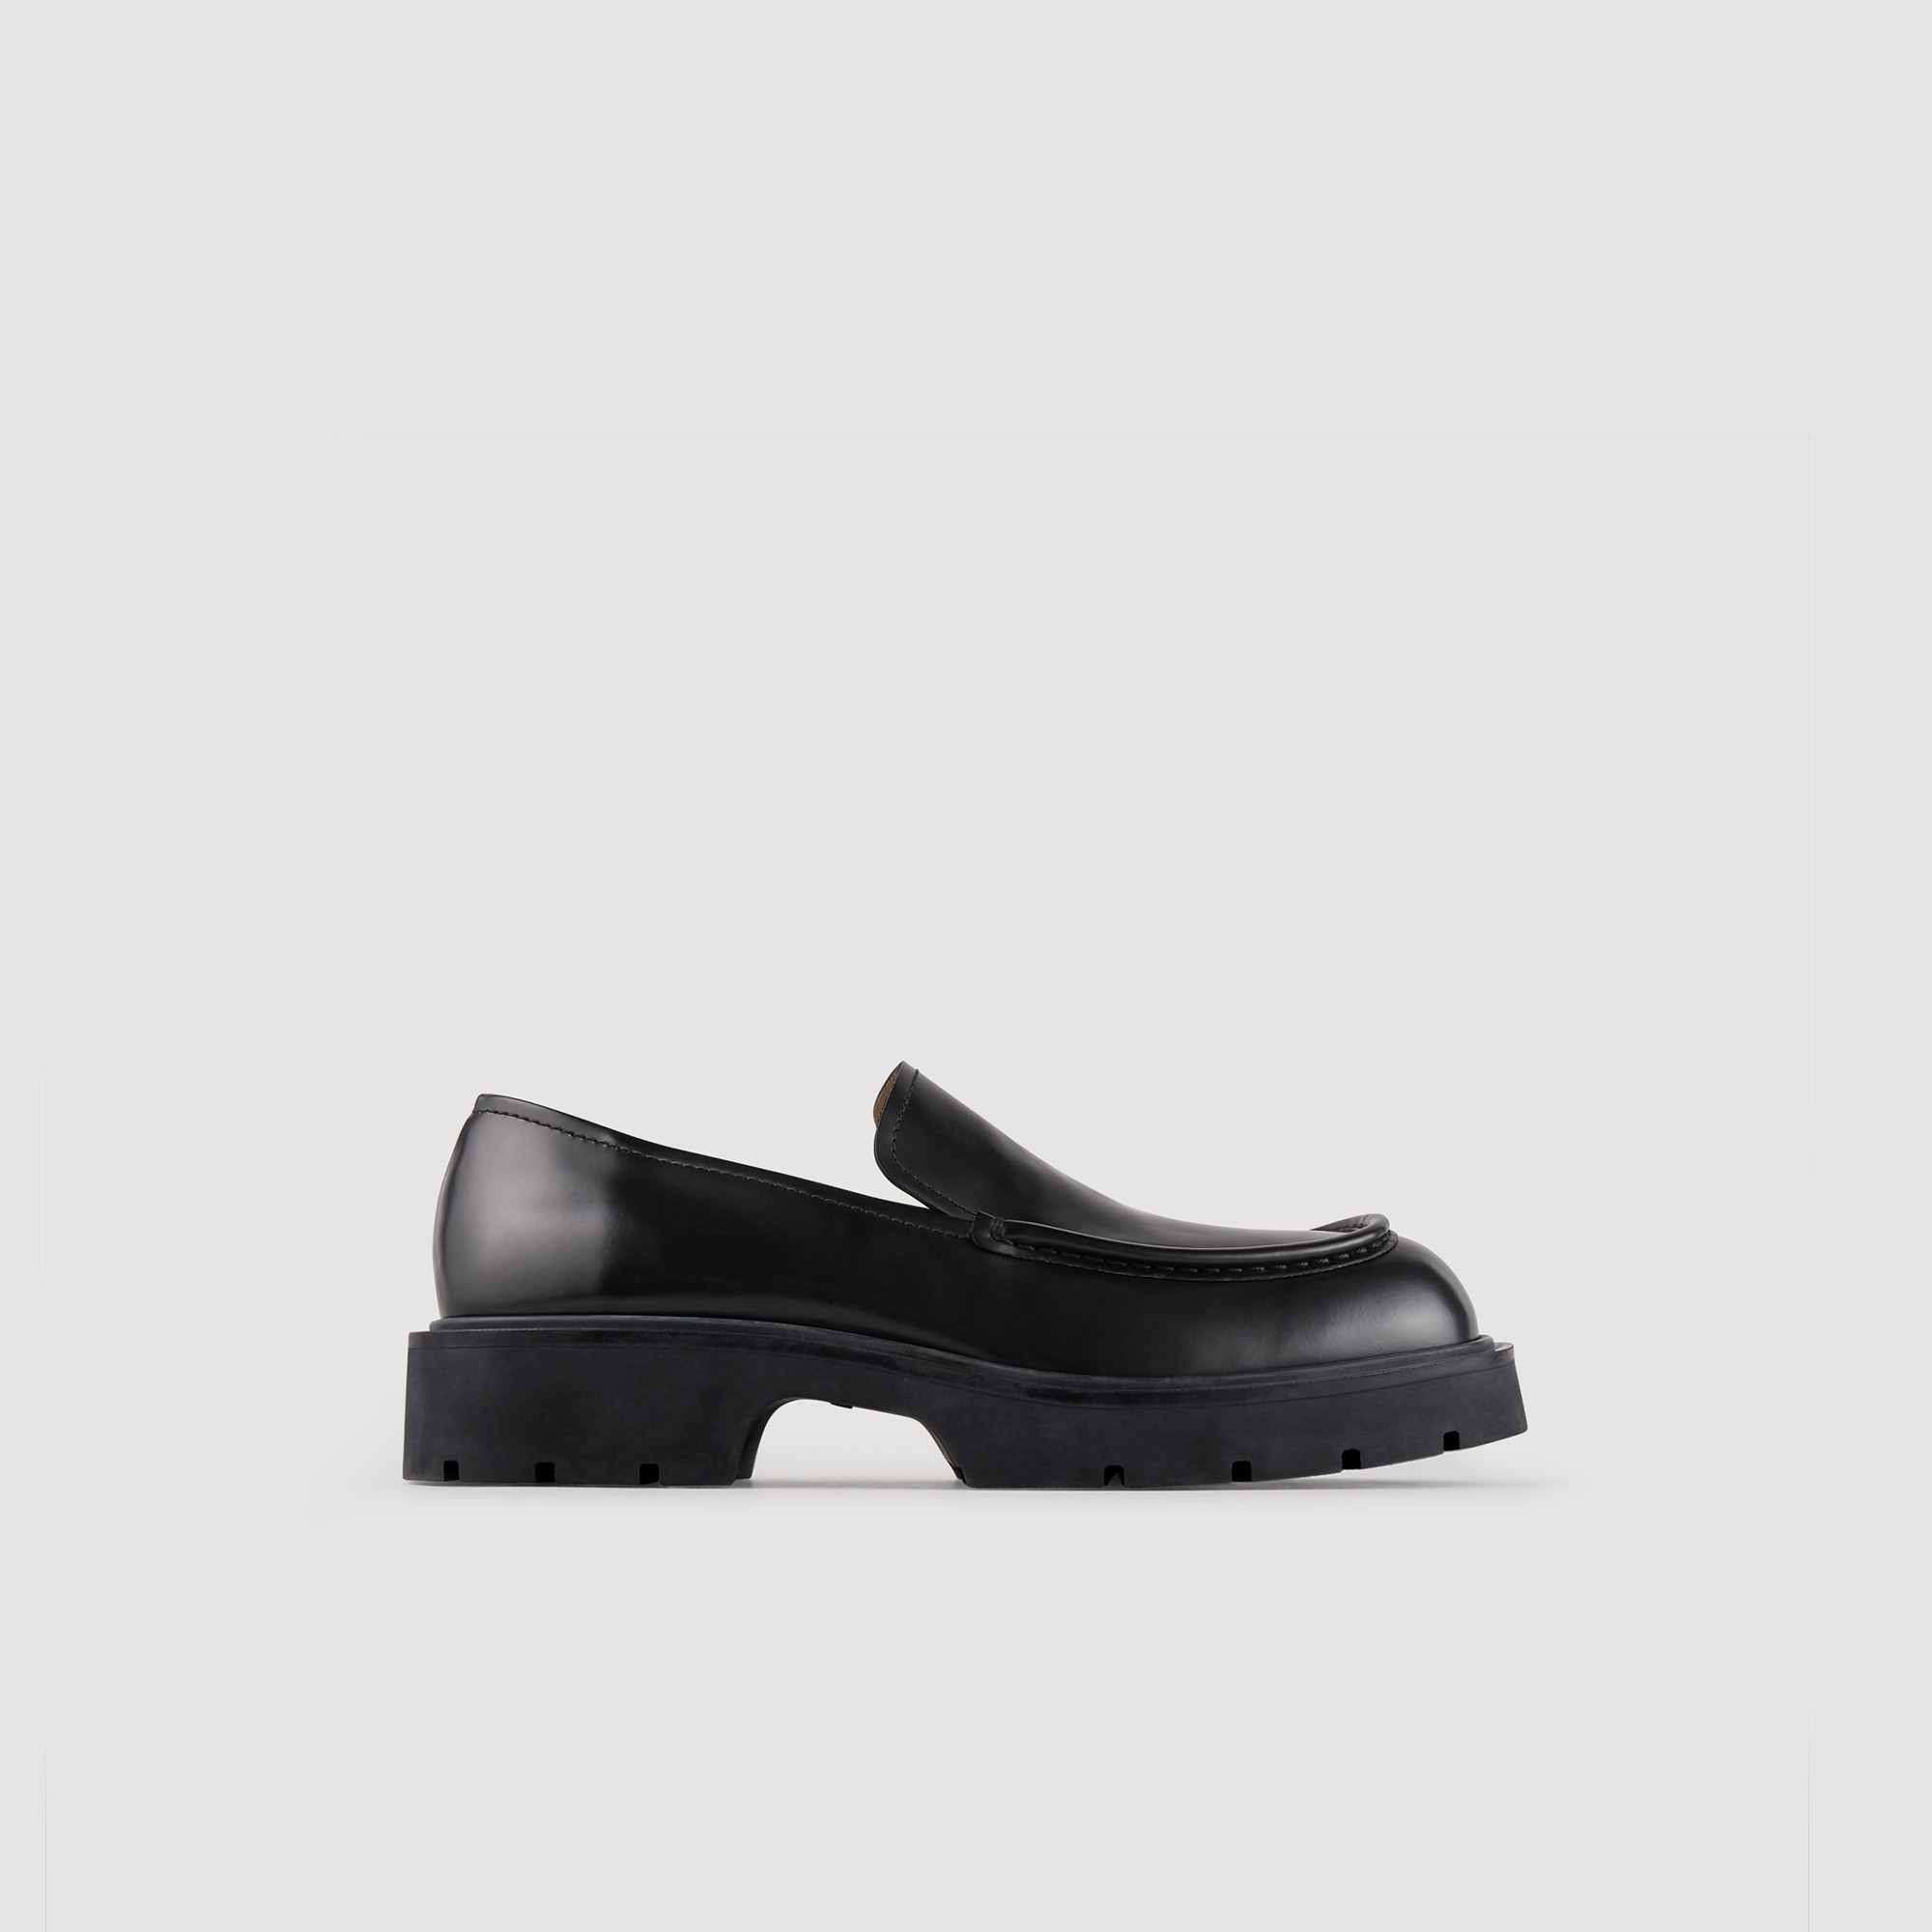 Sandro calfskin Patent leather loafers